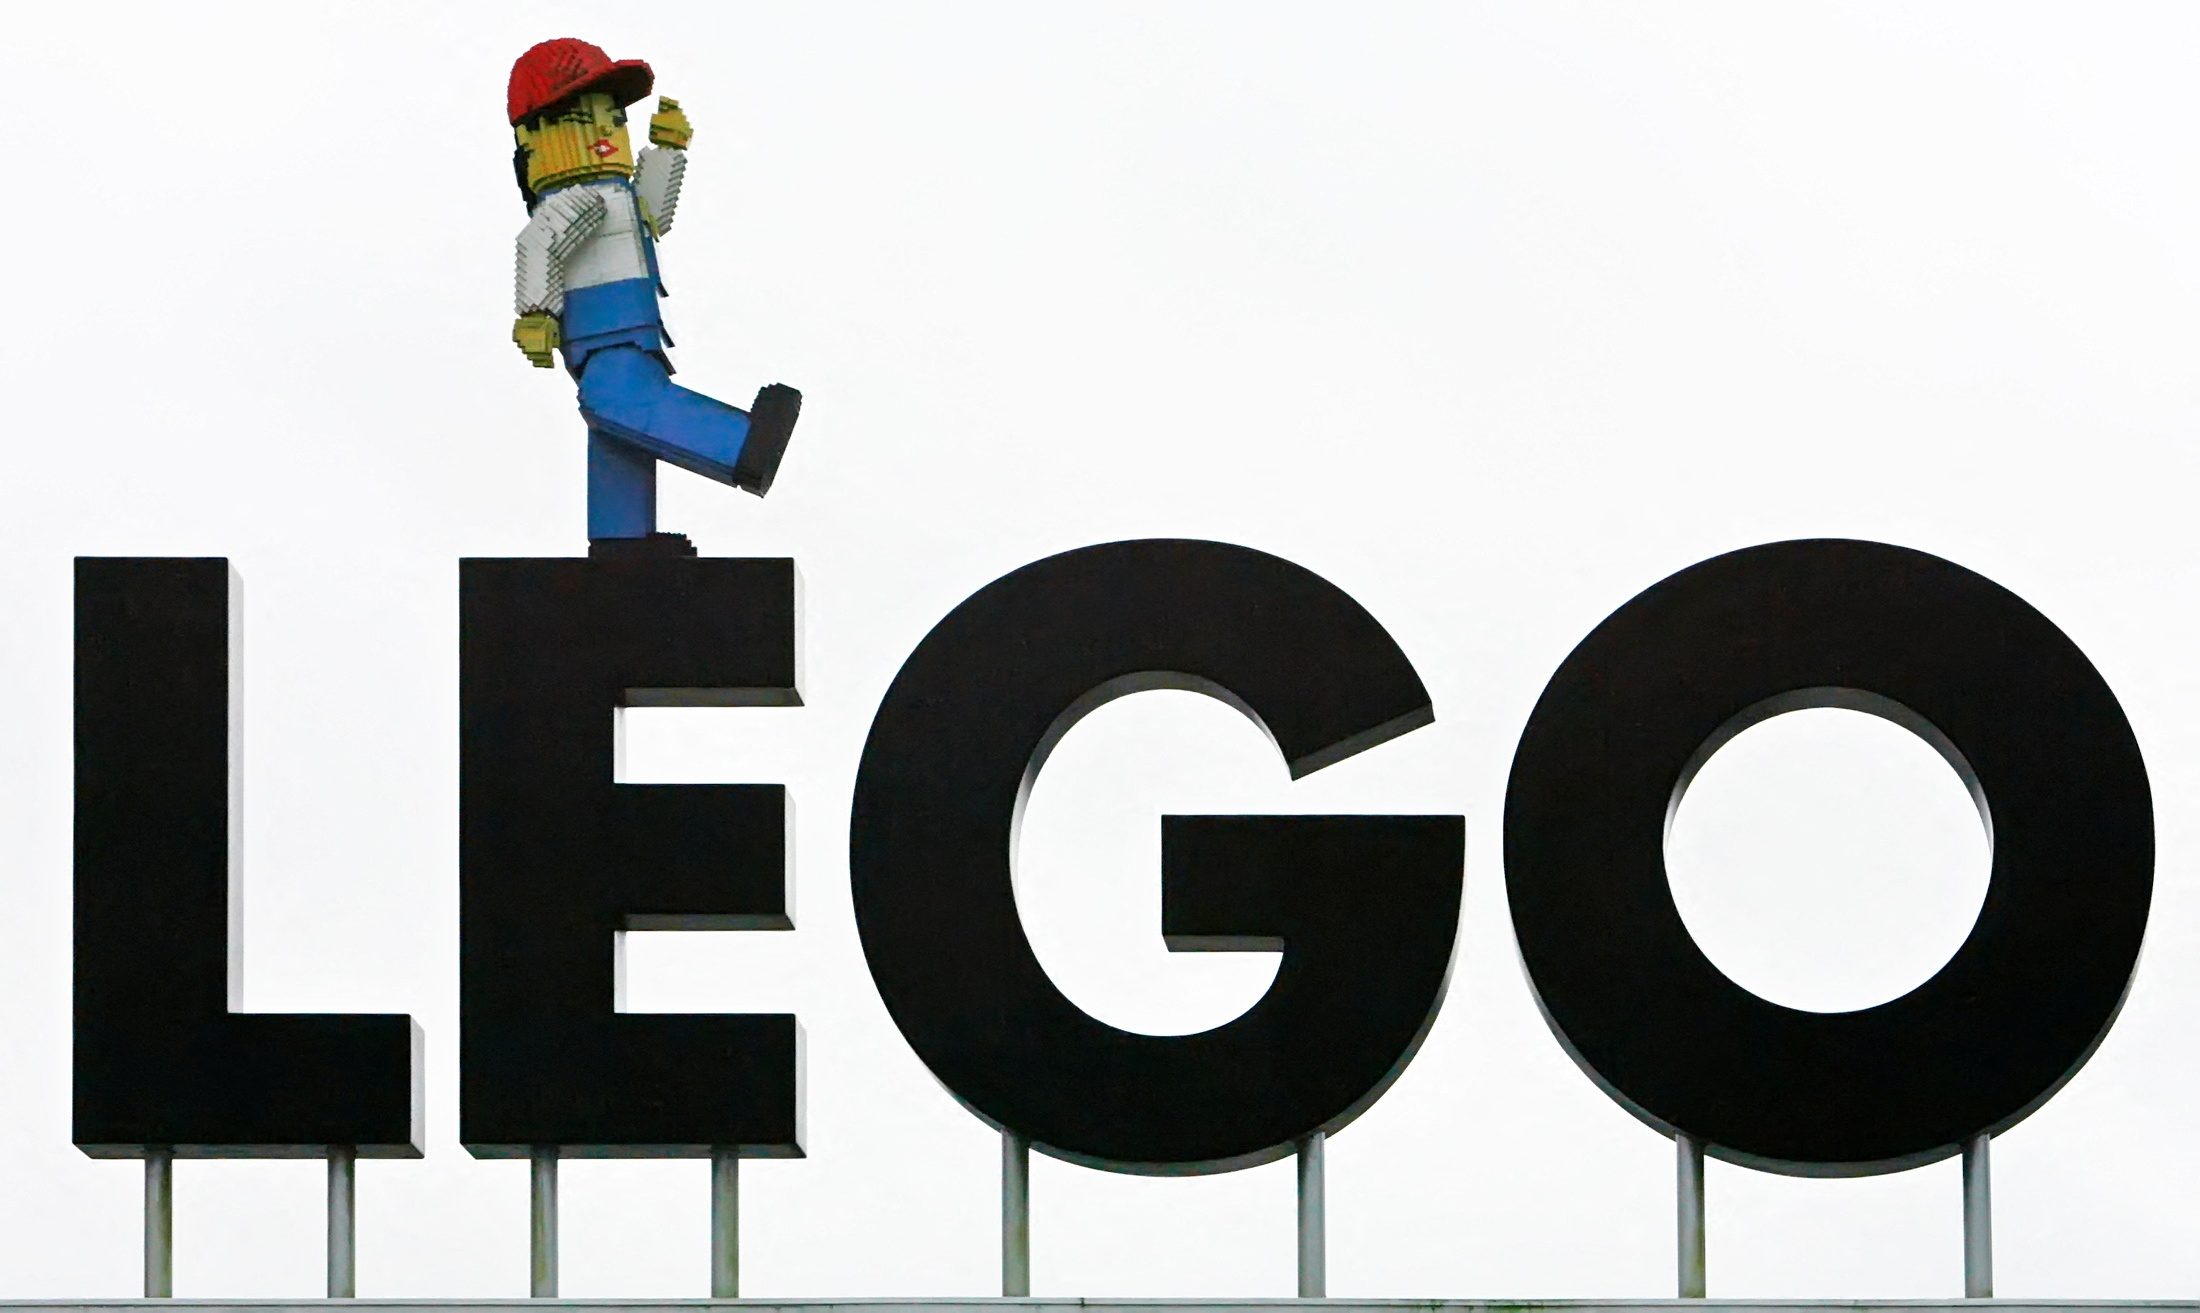 Lego to invest over $1 billion in US brick plant